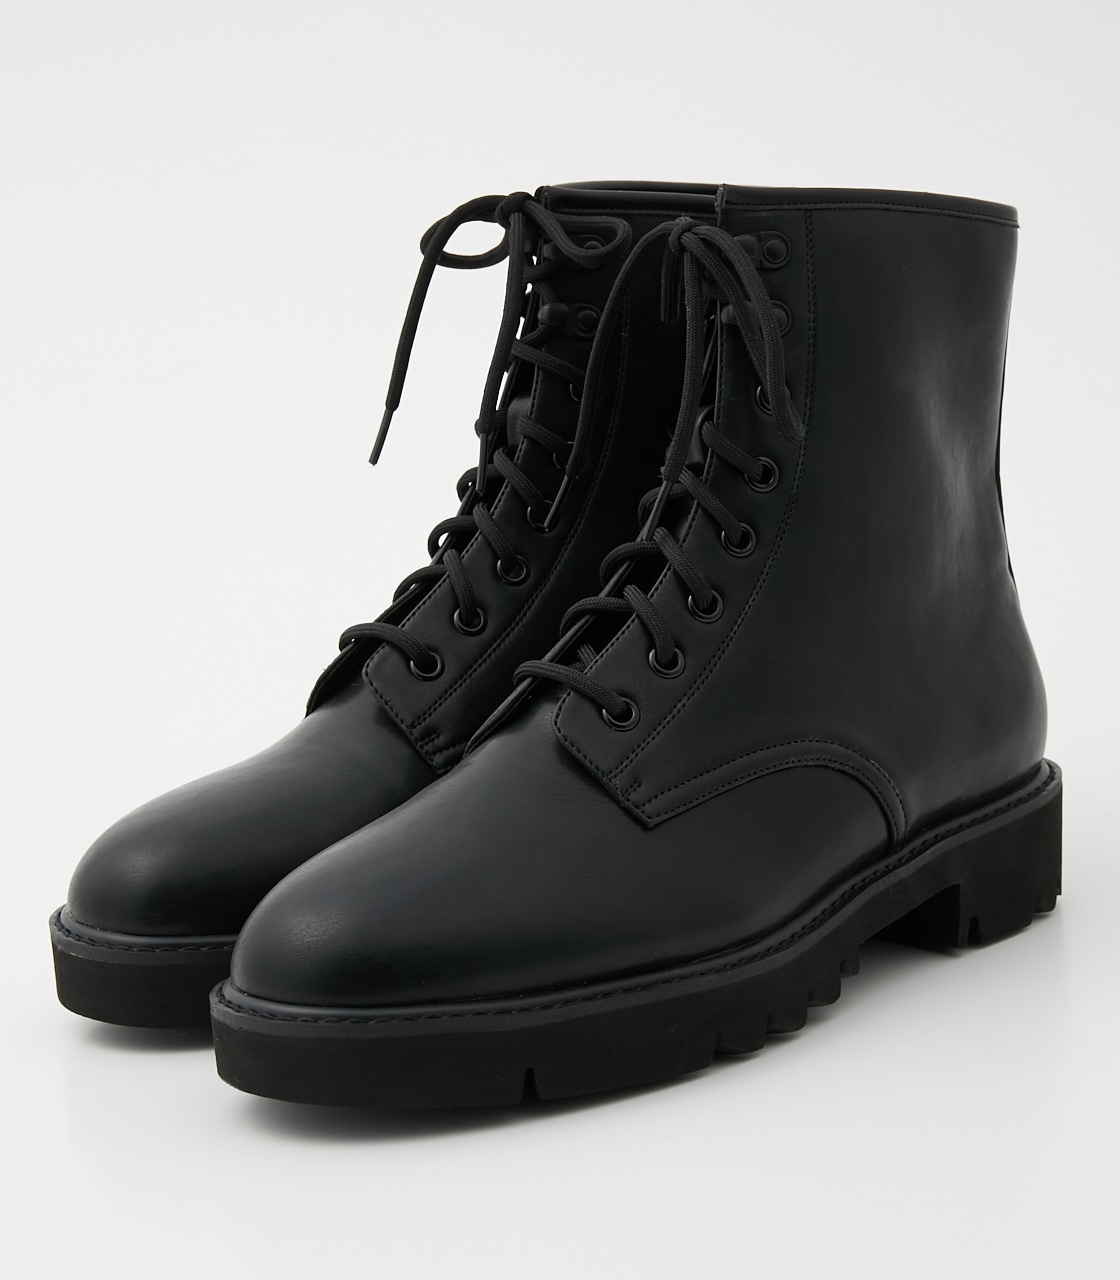 LACE UP BOOTS/レースアップブーツ